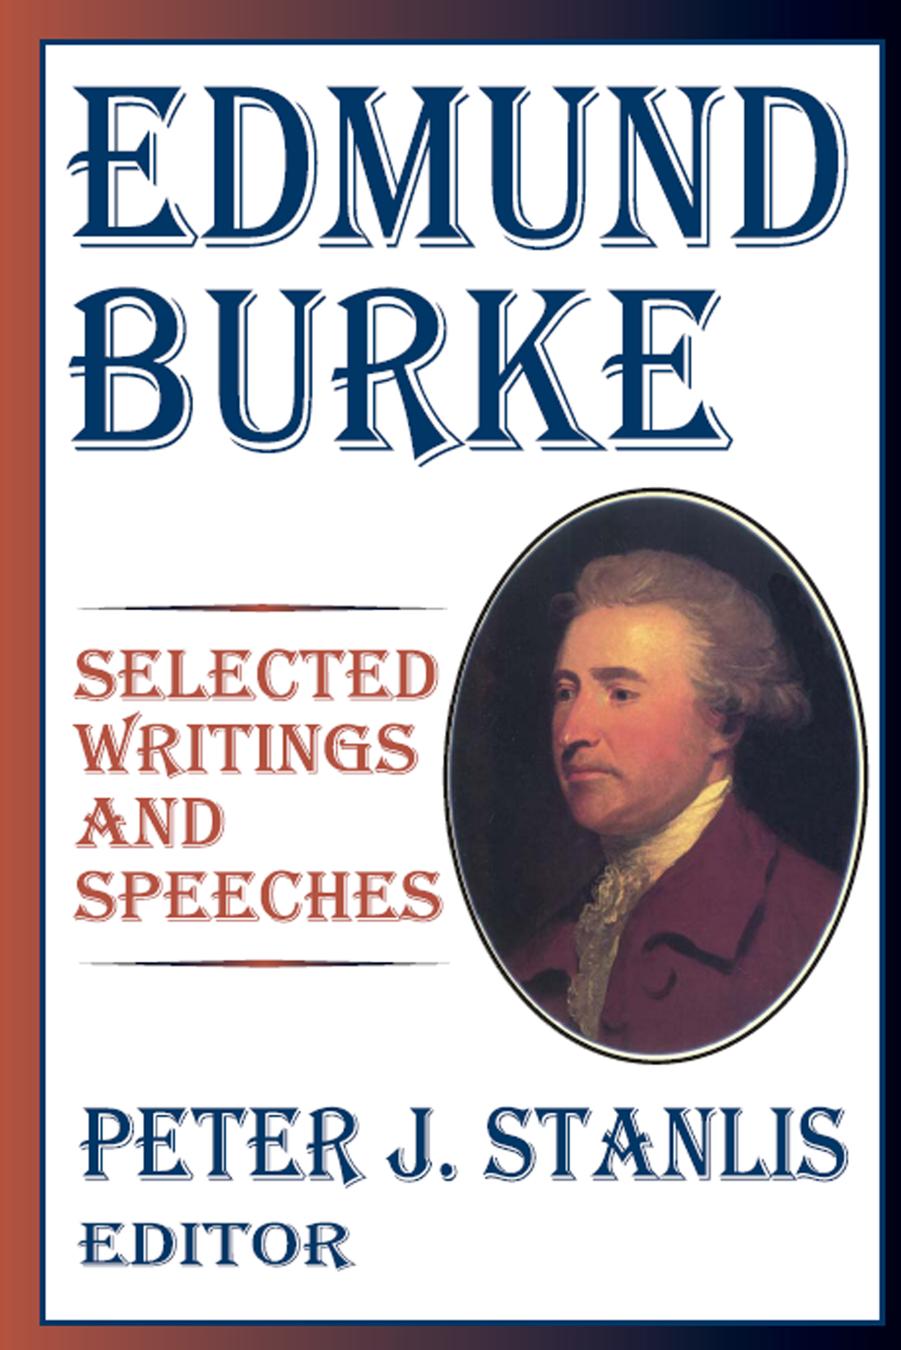 (eBook PDF)The Best of Burke: Selected Writings and Speeches of Edmund Burke by Peter J. Stanlis